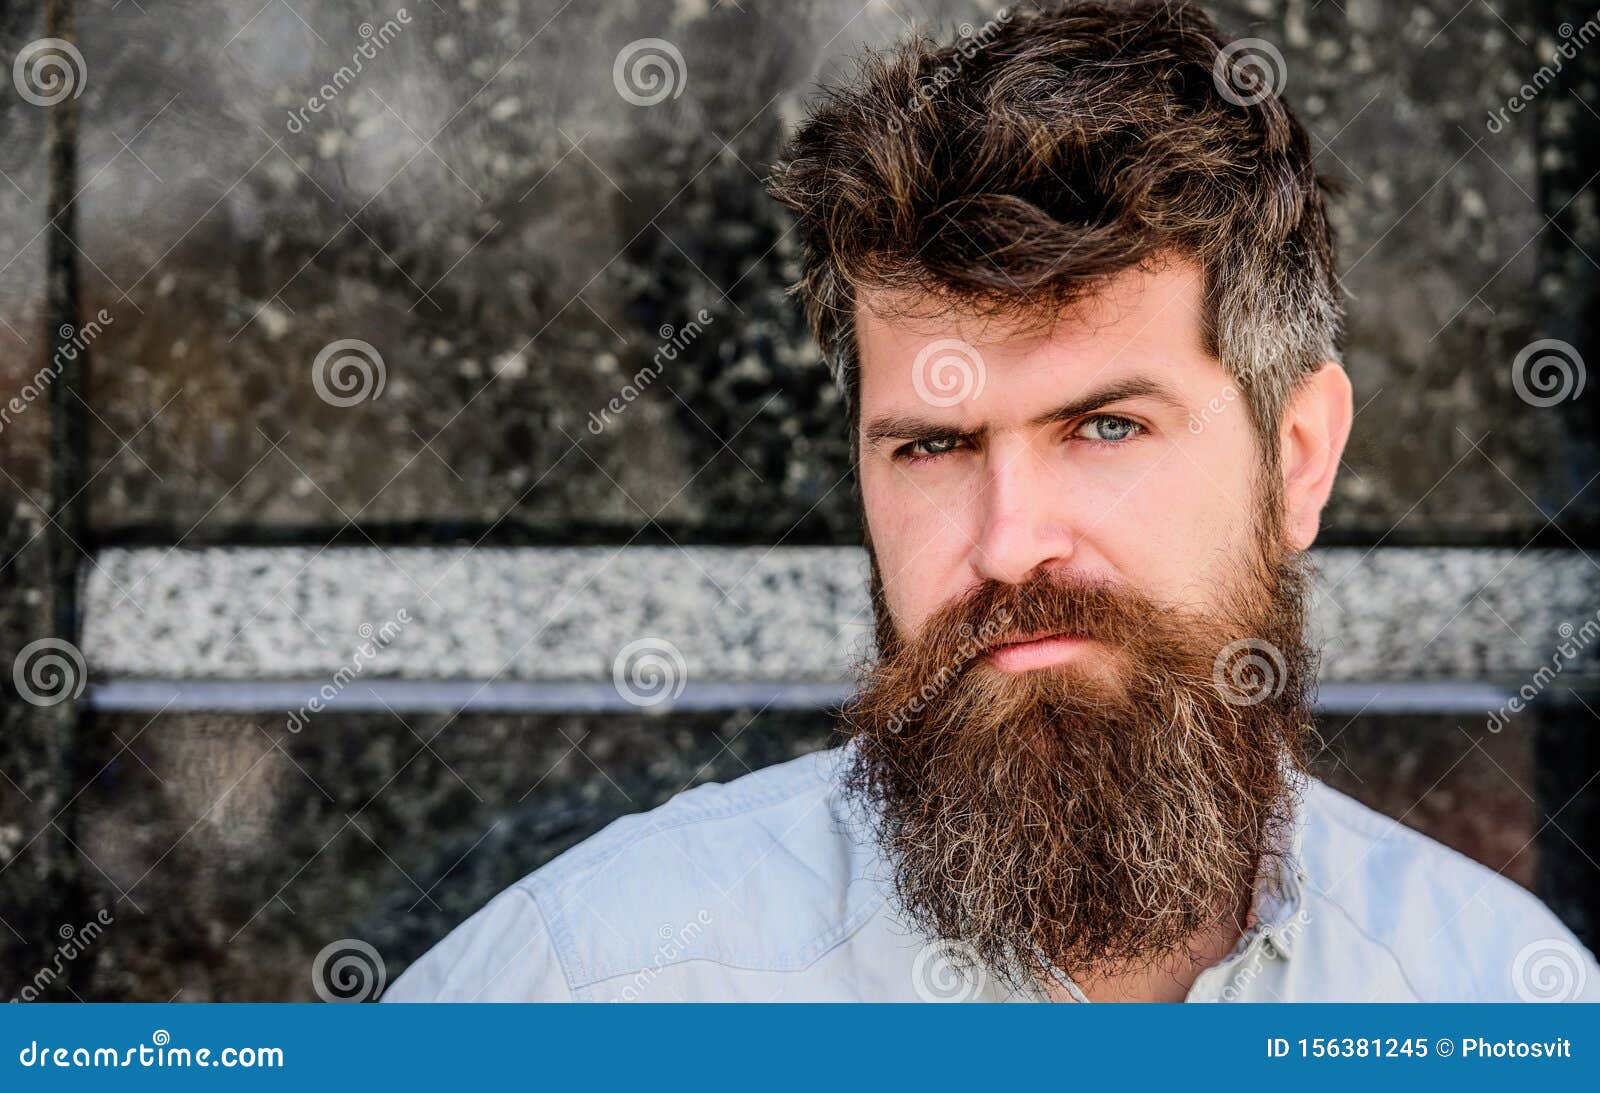 Confident Posture of Handsome Man. Guy Masculine Appearance with Long  Beard. Barber Concept. Beard Grooming Stock Image - Image of cool,  confident: 156381245